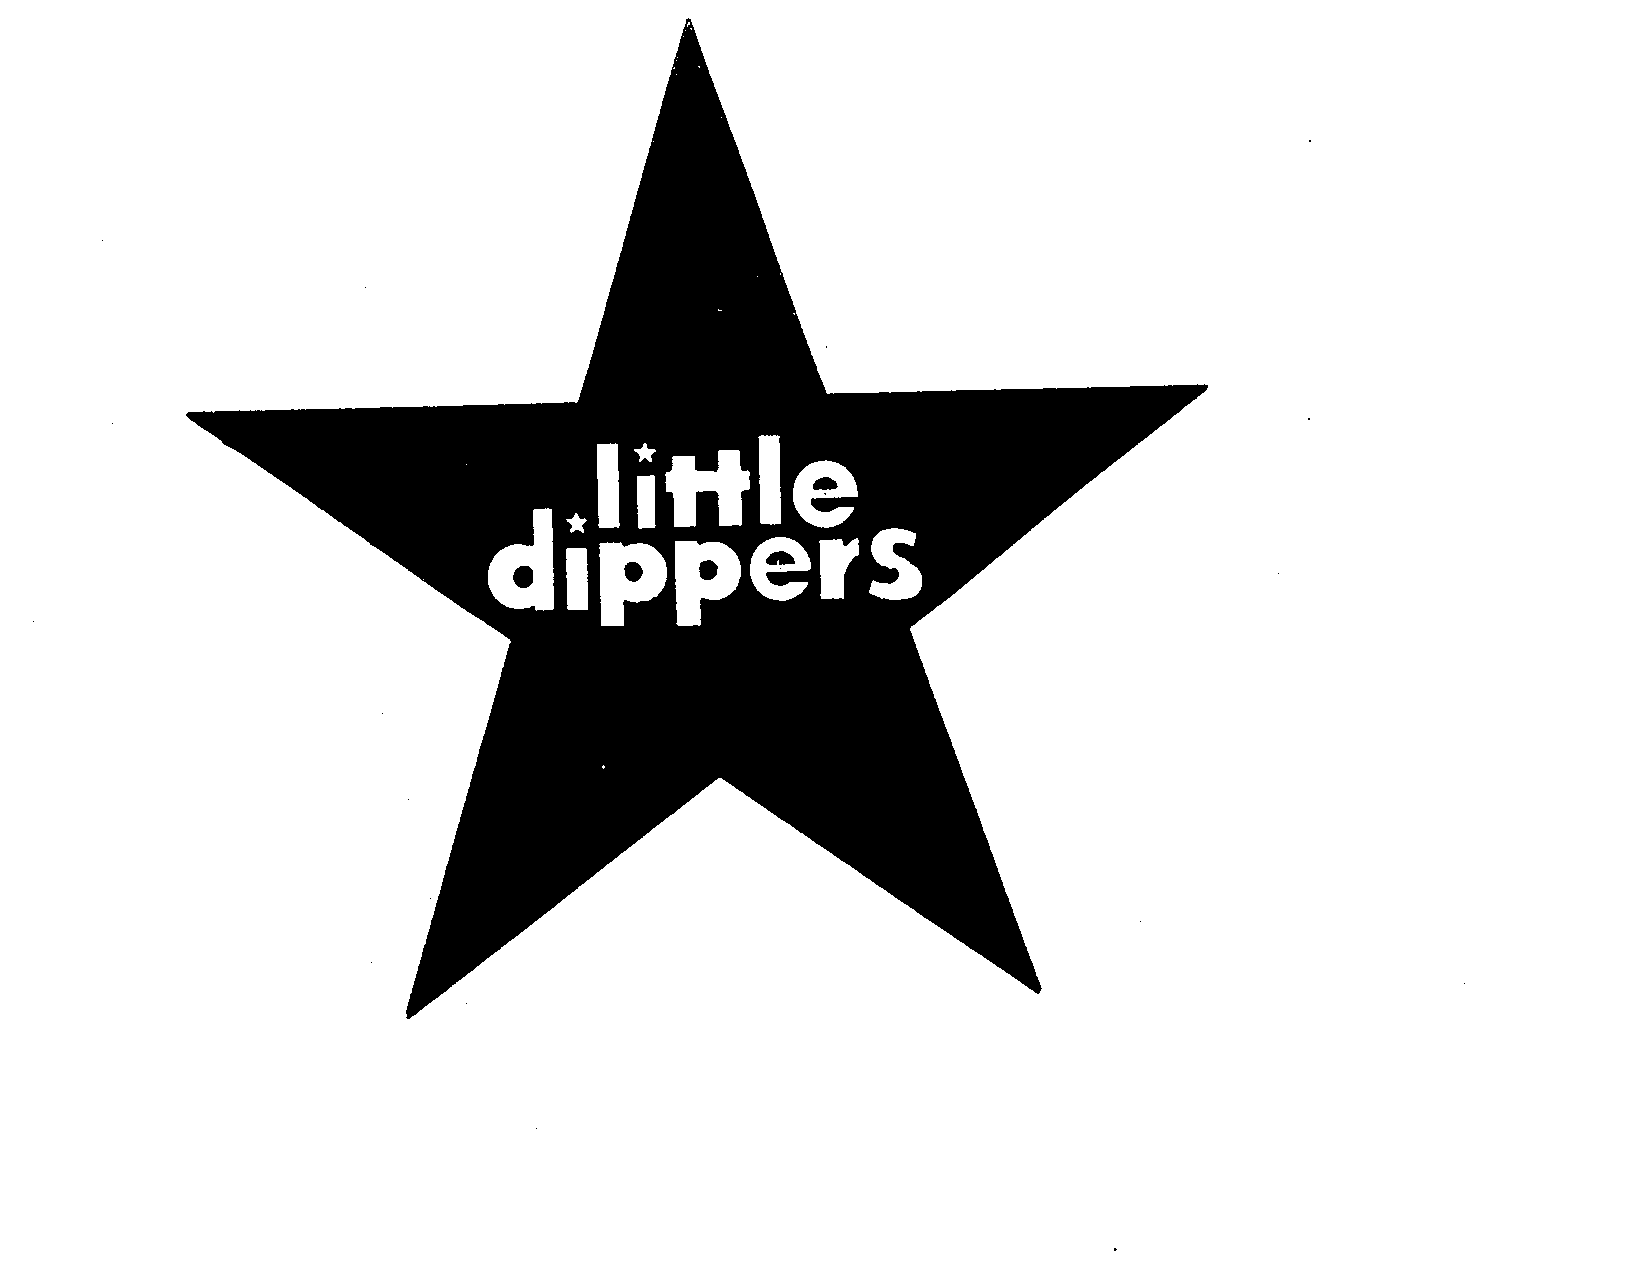 LITTLE DIPPERS